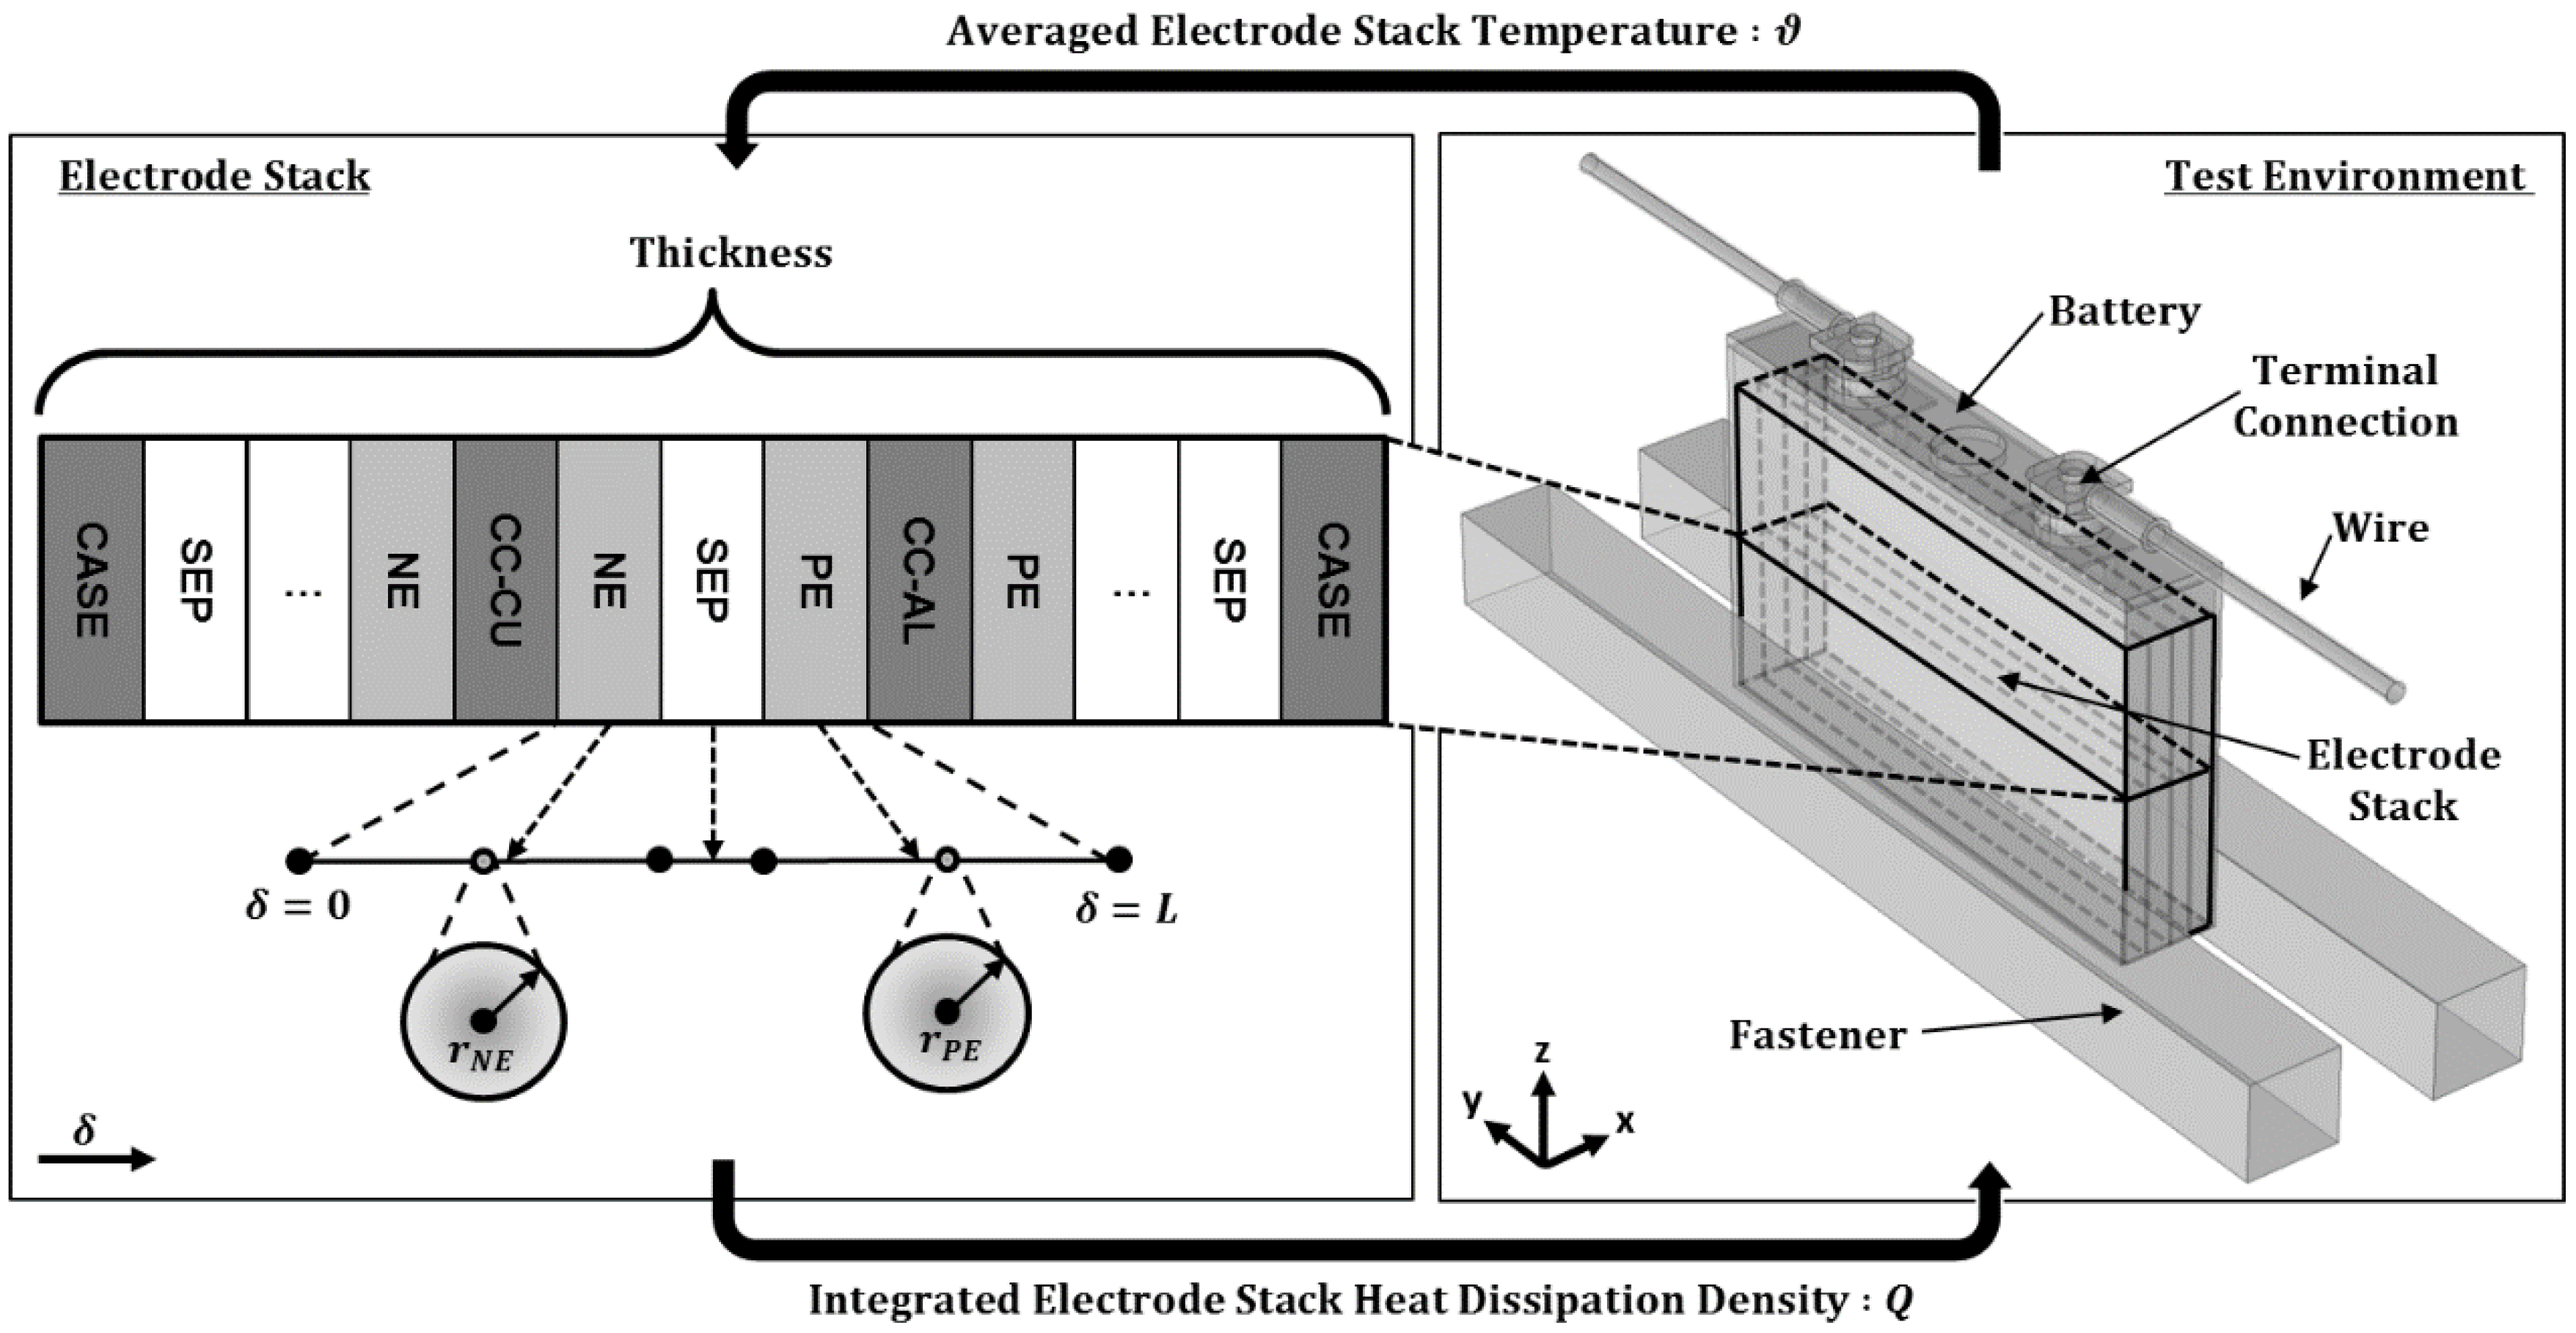 Free Full-Text | The Impact of Environmental Factors on the Thermal of a Lithium–ion Battery